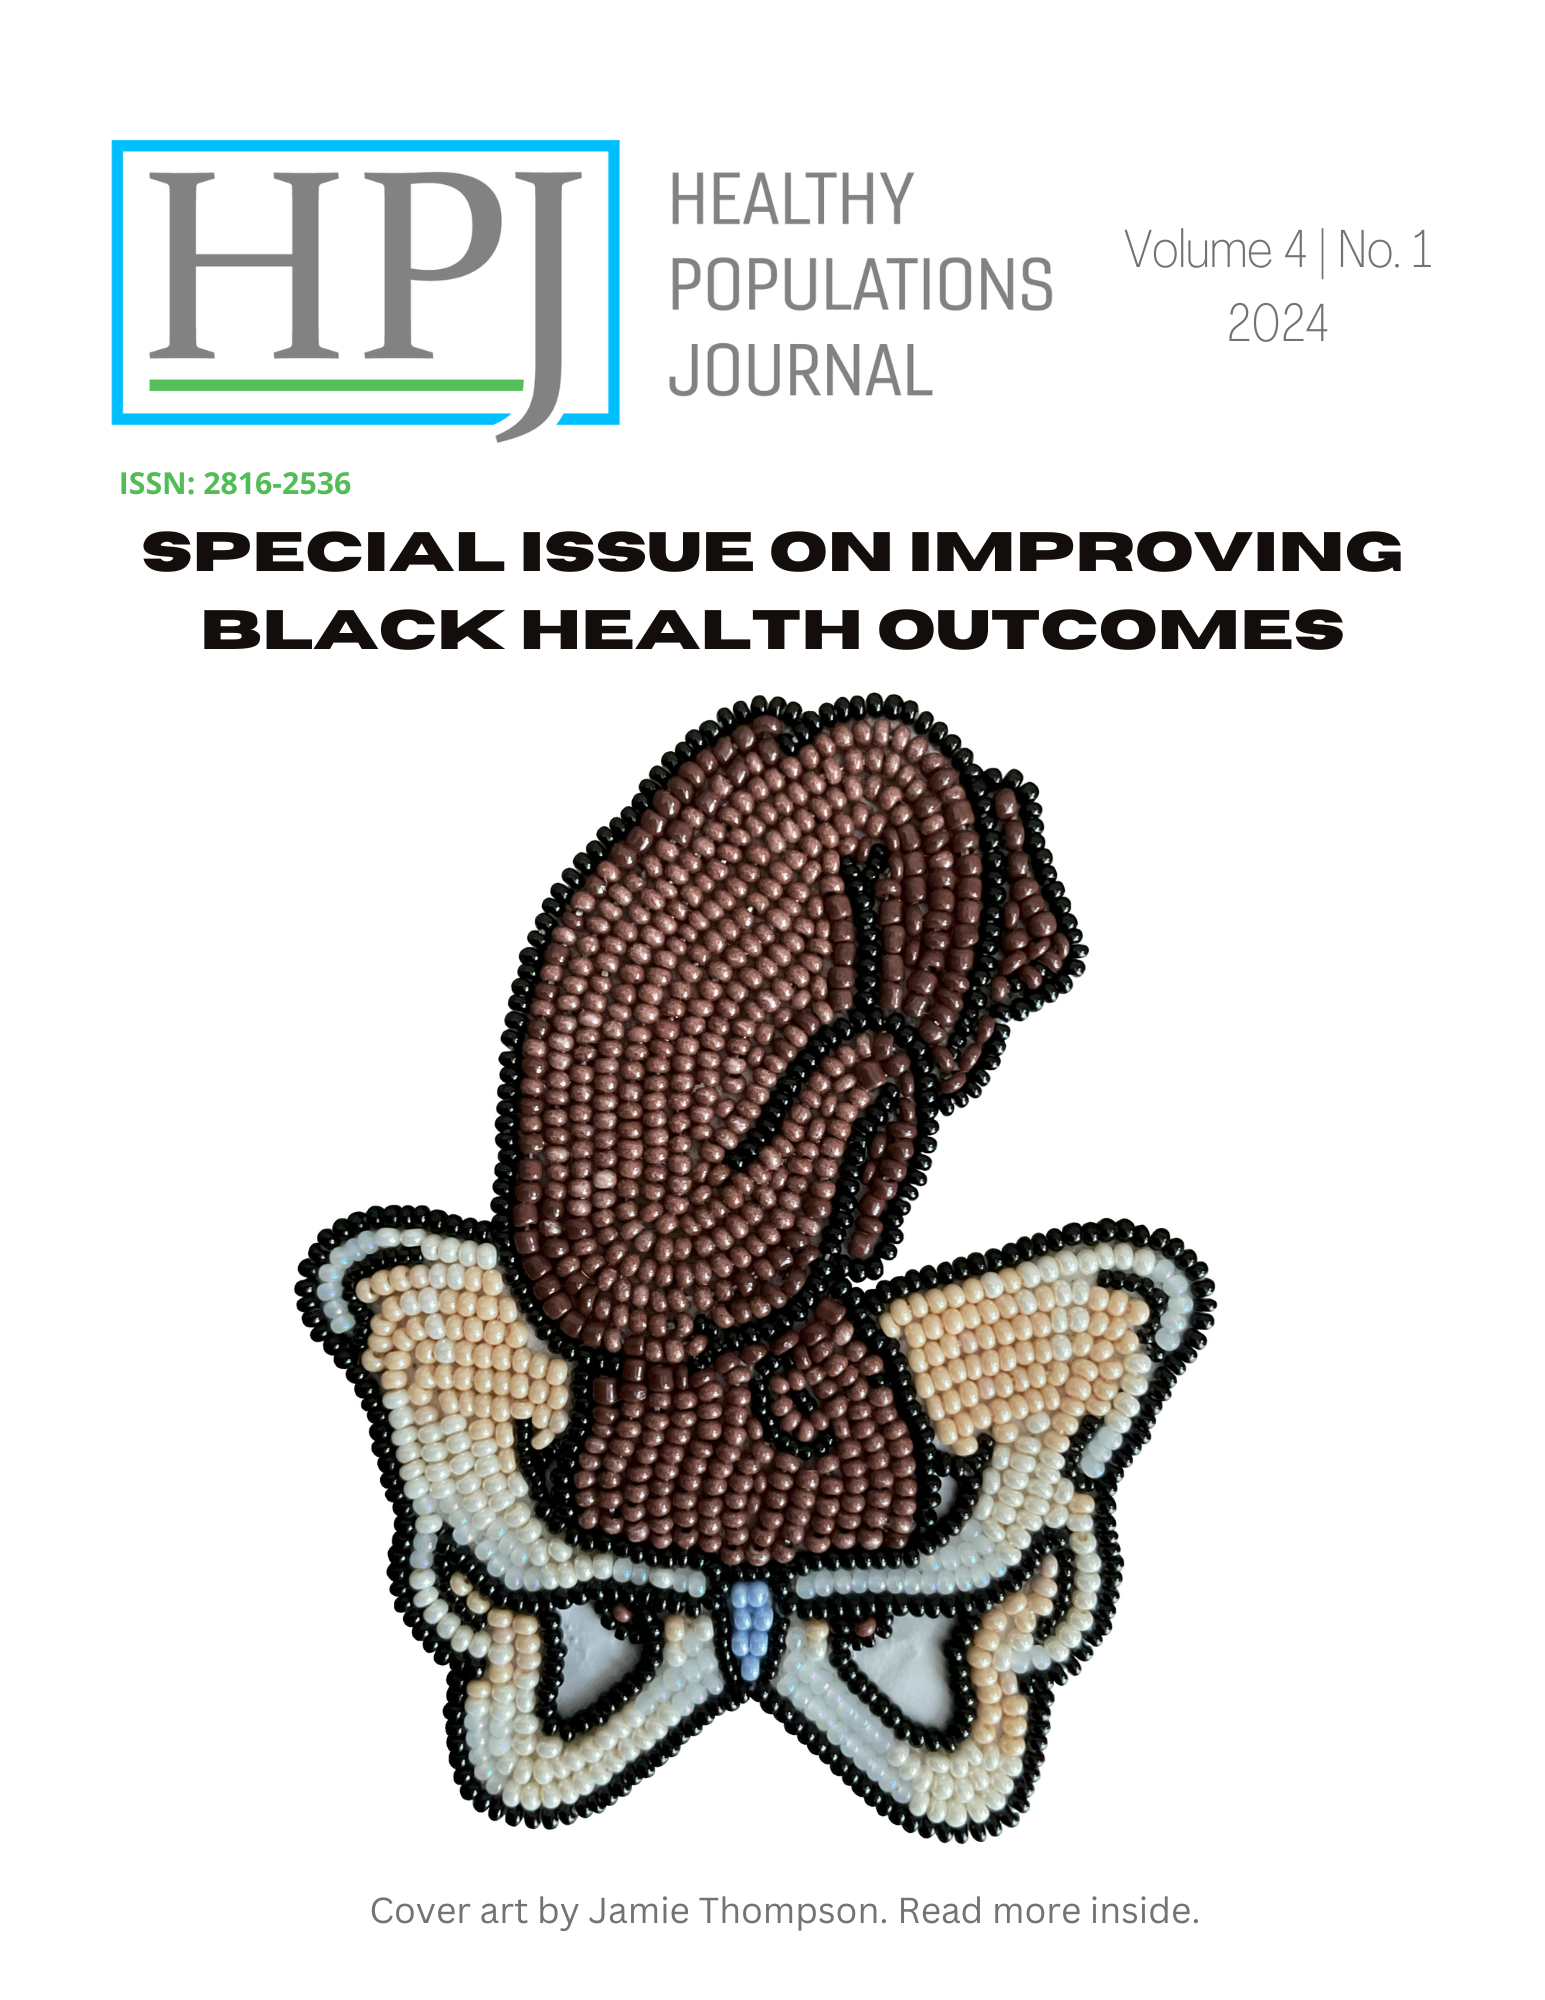 					Ver Vol. 4 N.º 1 (2024): Special Issue on Improving Black Health Outcomes
				